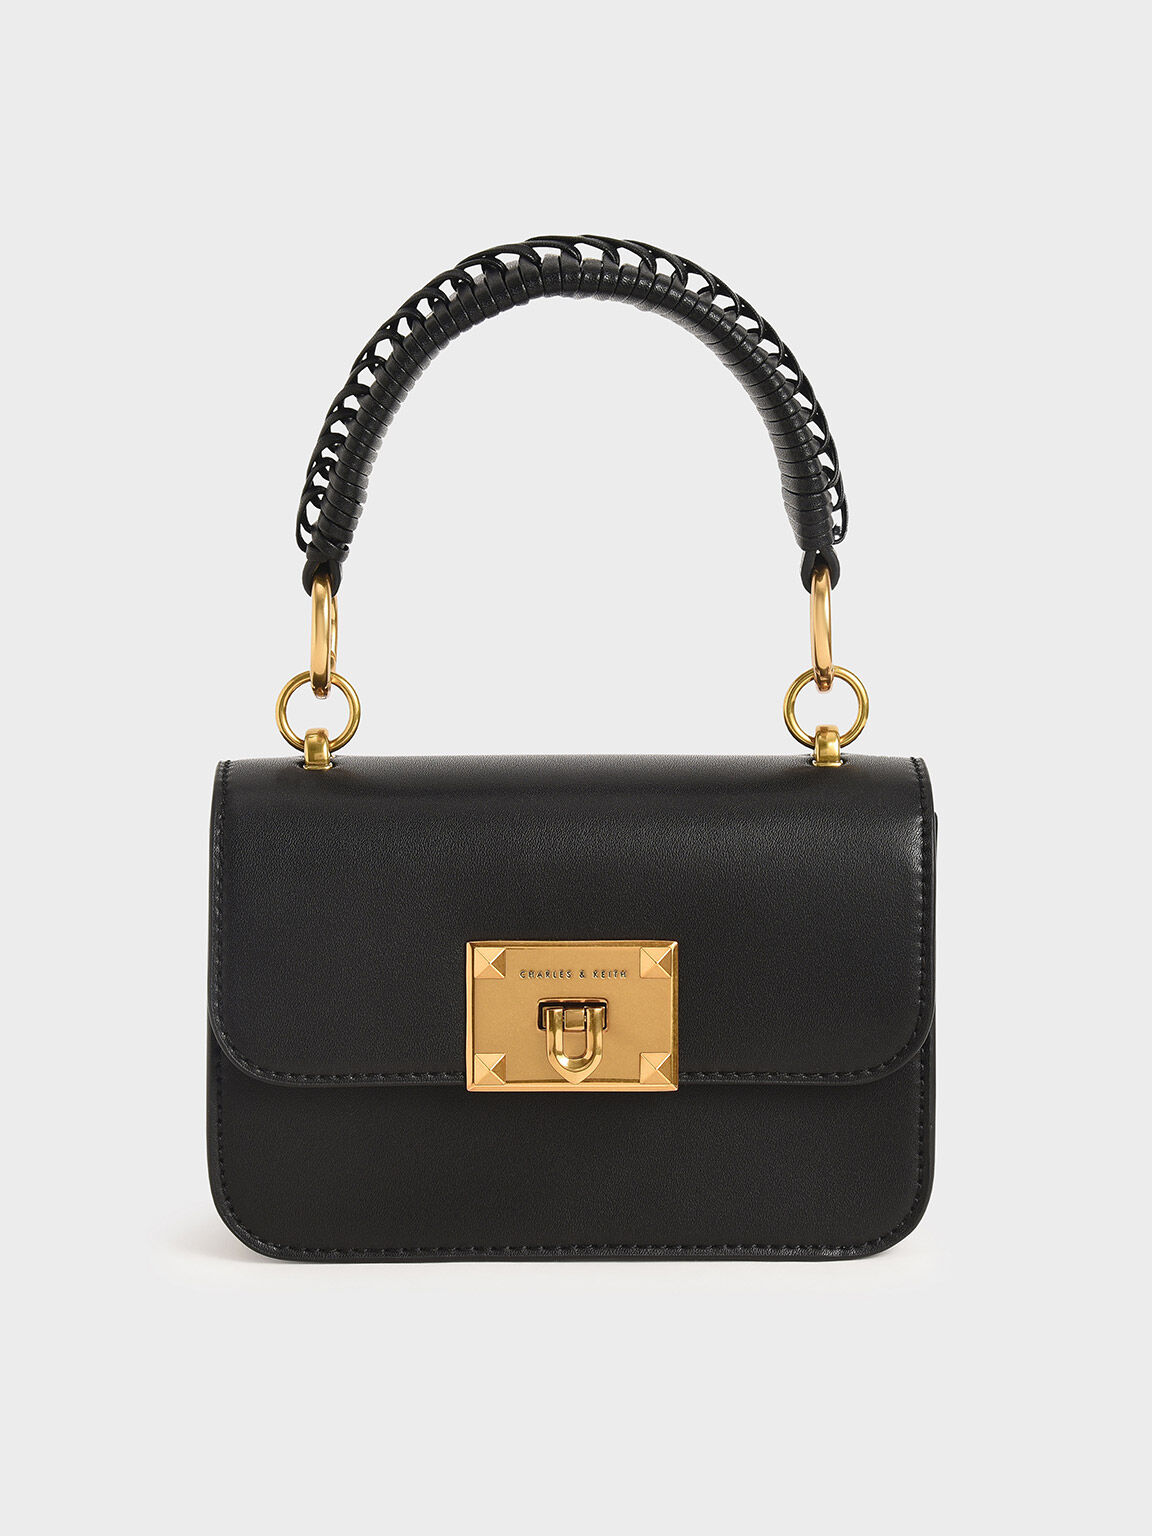 Women's Handbags | Exclusive Styles | CHARLES & KEITH SG